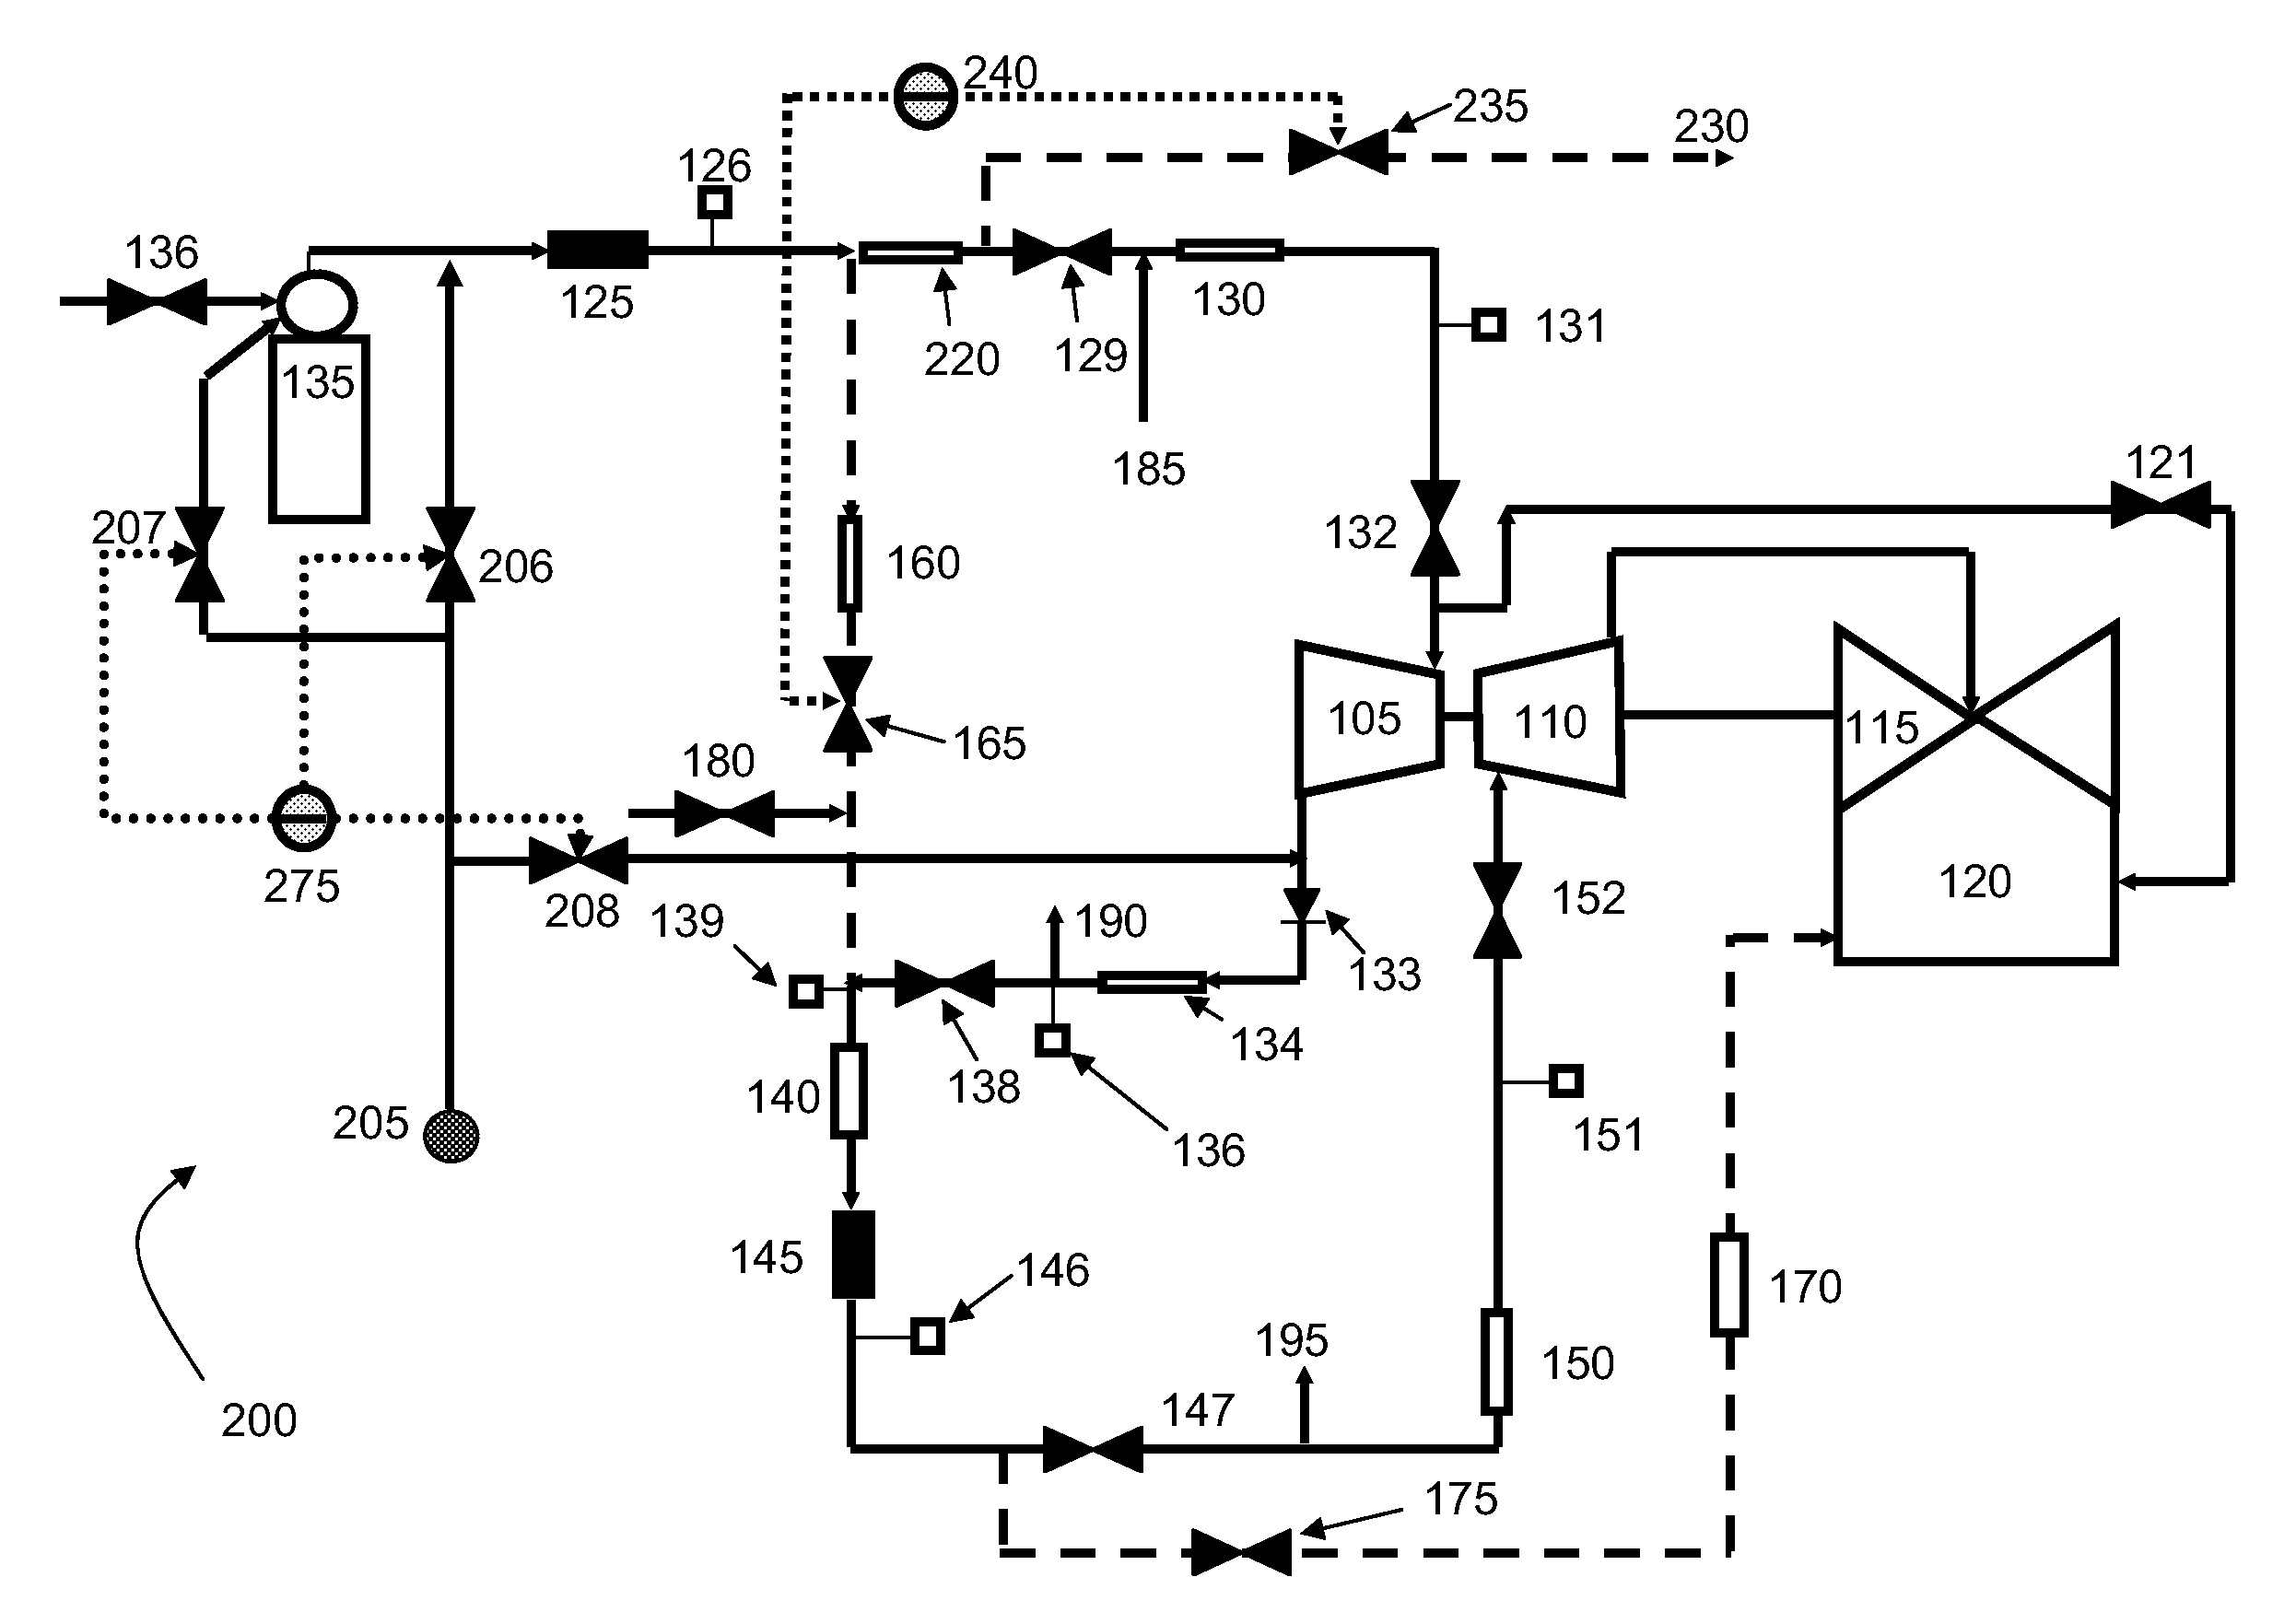 Systems and Methods for Pre-Warming a Heat Recovery Steam Generator and Associated Steam Lines